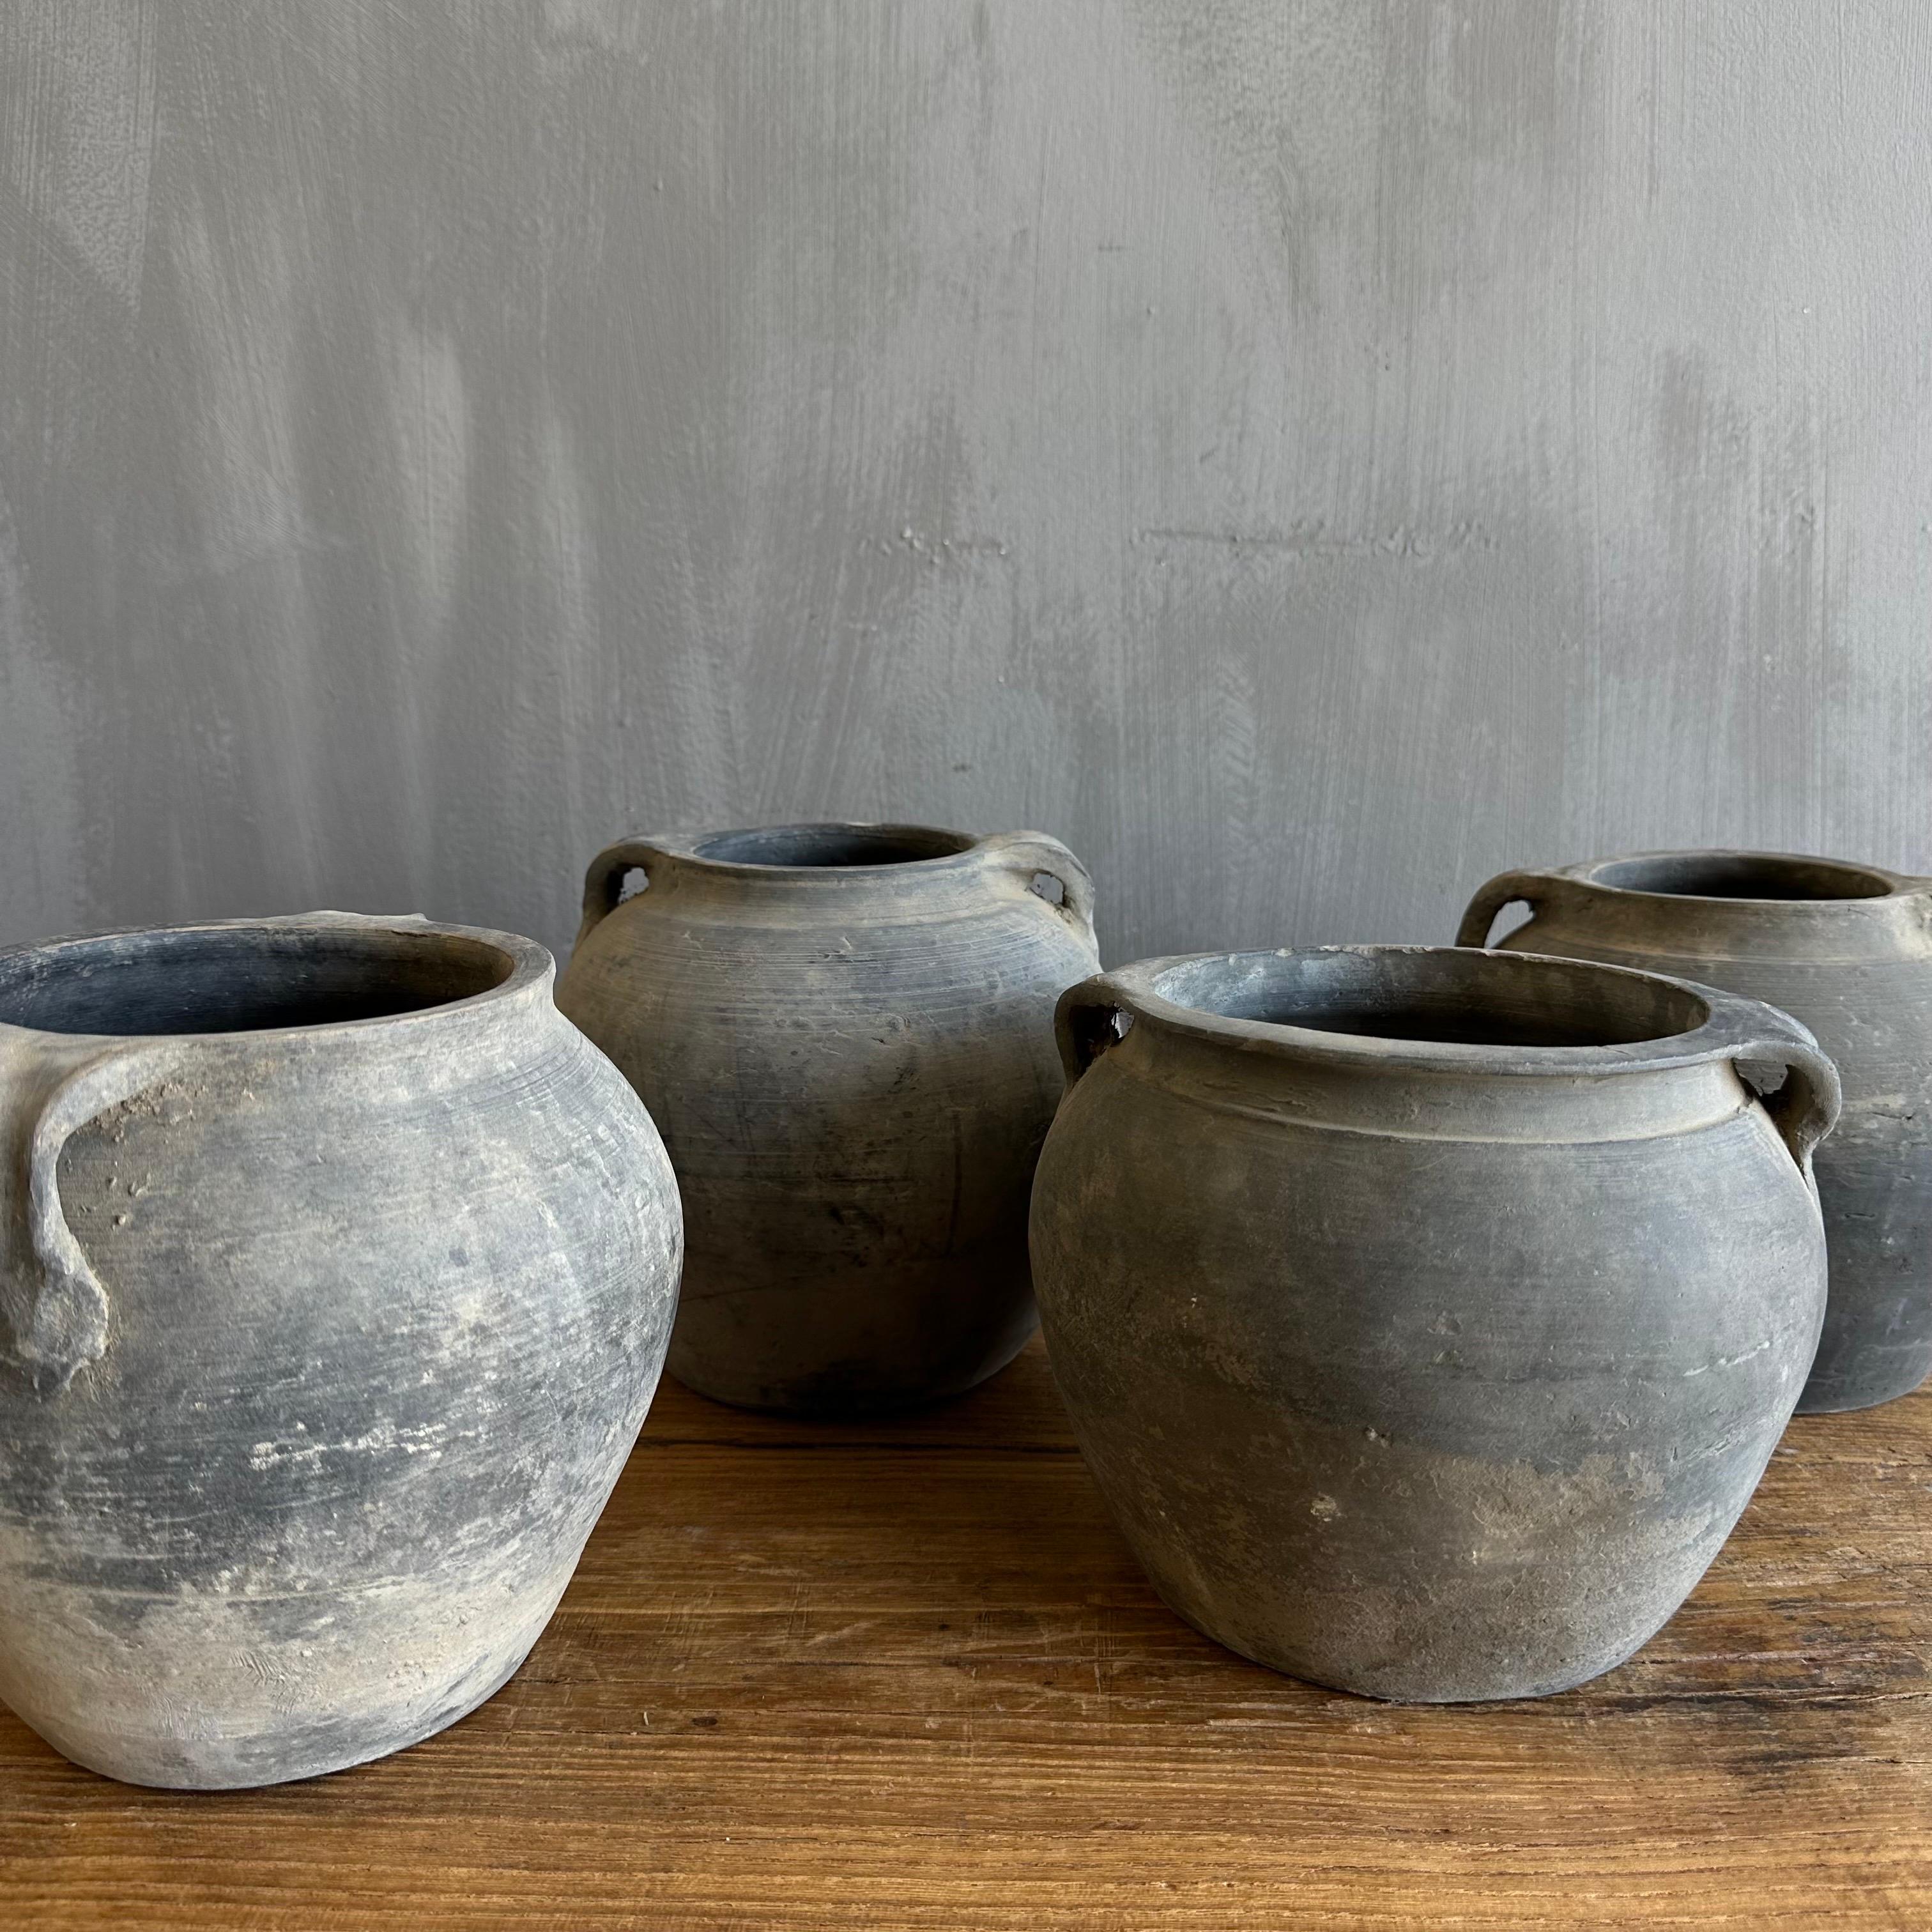 Beautiful weathered 2 handled grey vintage clay pot that is beautifully colored and authentically worn. The surface of the pot and handle are peeling in places, revealing the original clay below. 

These qualities give the pot a lived-in appearance